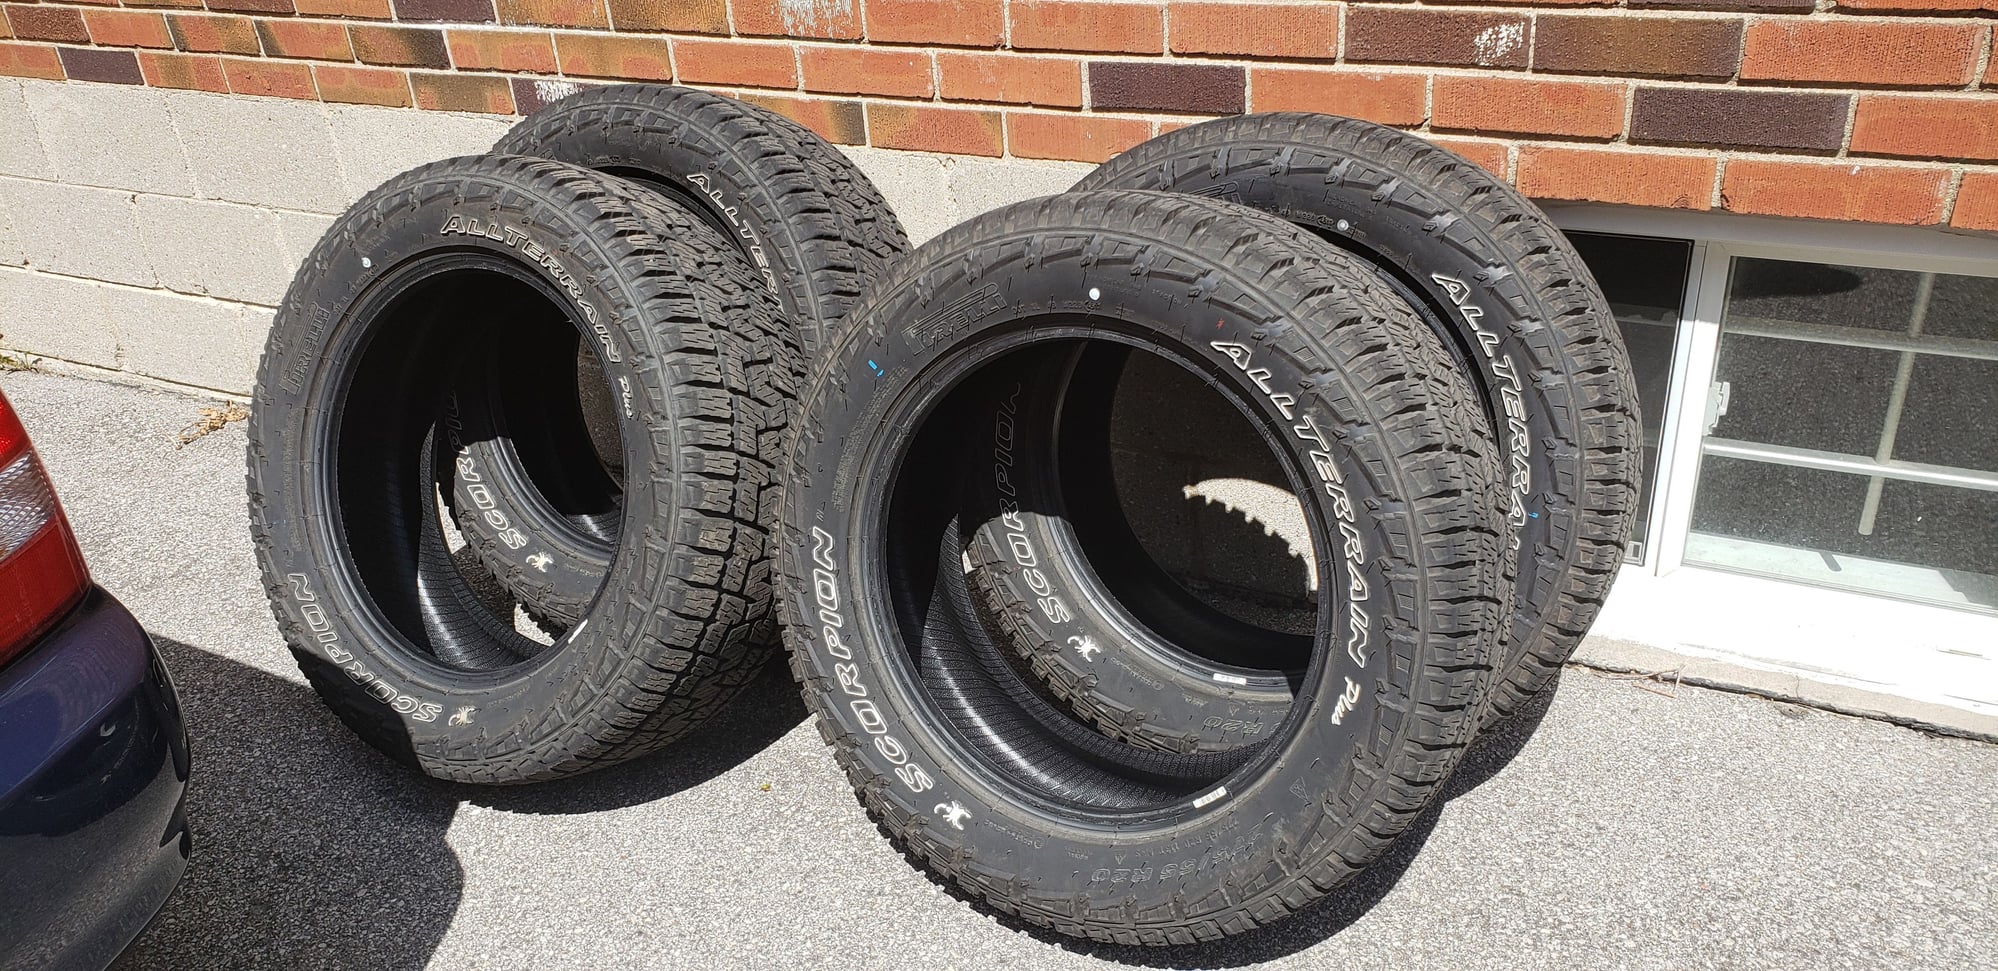 Community of - Ford - F150 - Page replacement Fans Ford Truck Good tires? Forum 5